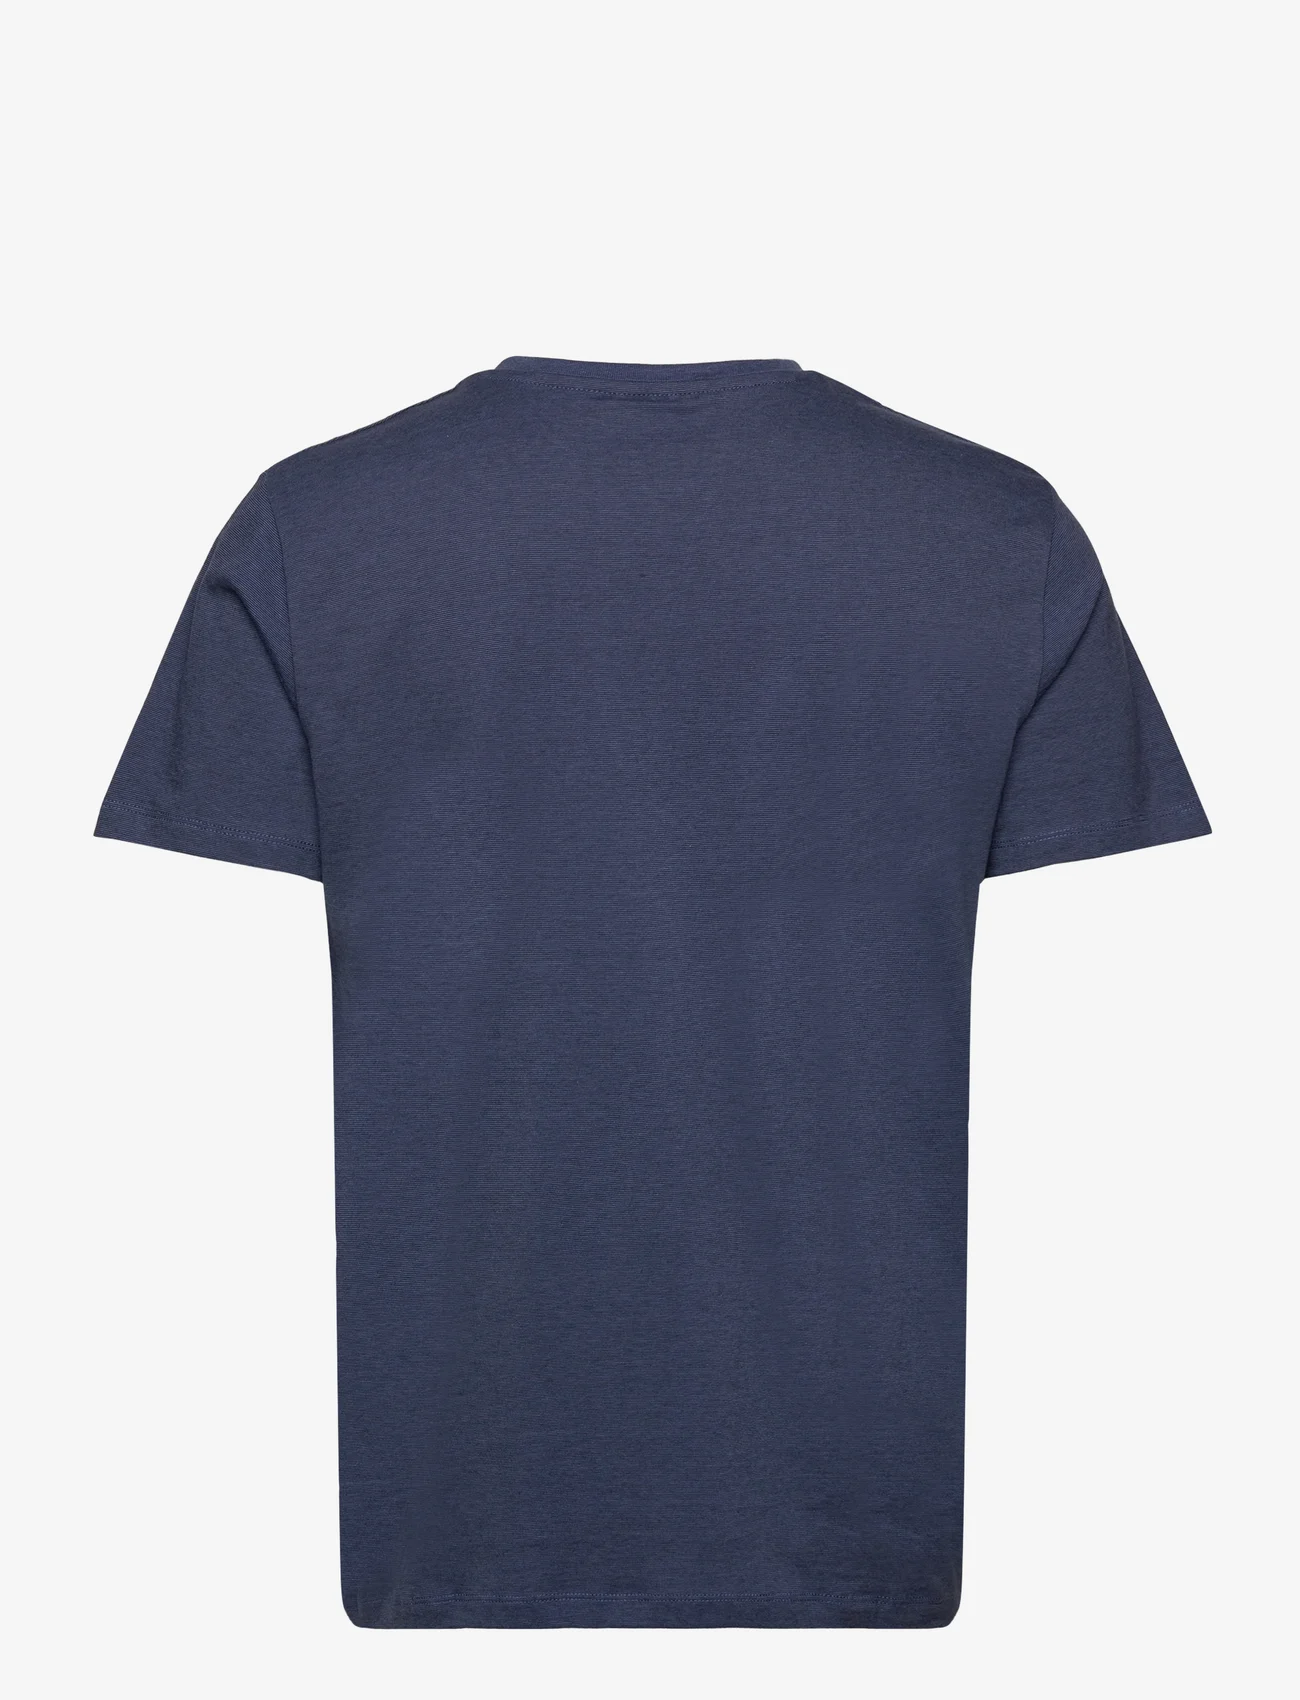 Selected Homme - SLHASPEN MINI STR SS O-NECK TEE NOOS - lowest prices - true navy - 1